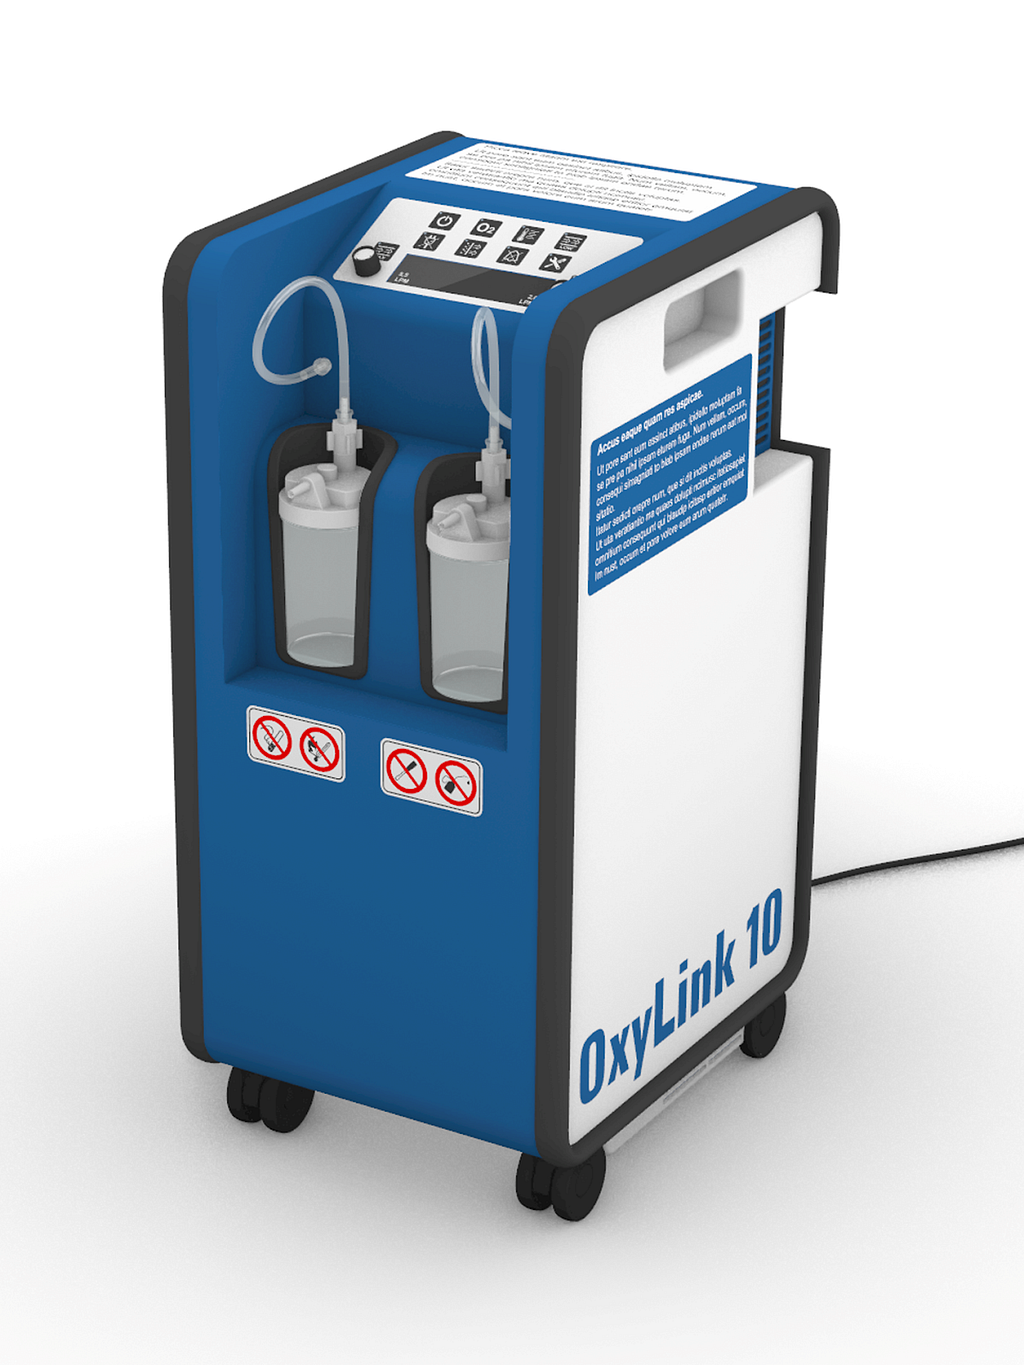 A digital render of an OxyLink 10 oxygen concentrator.